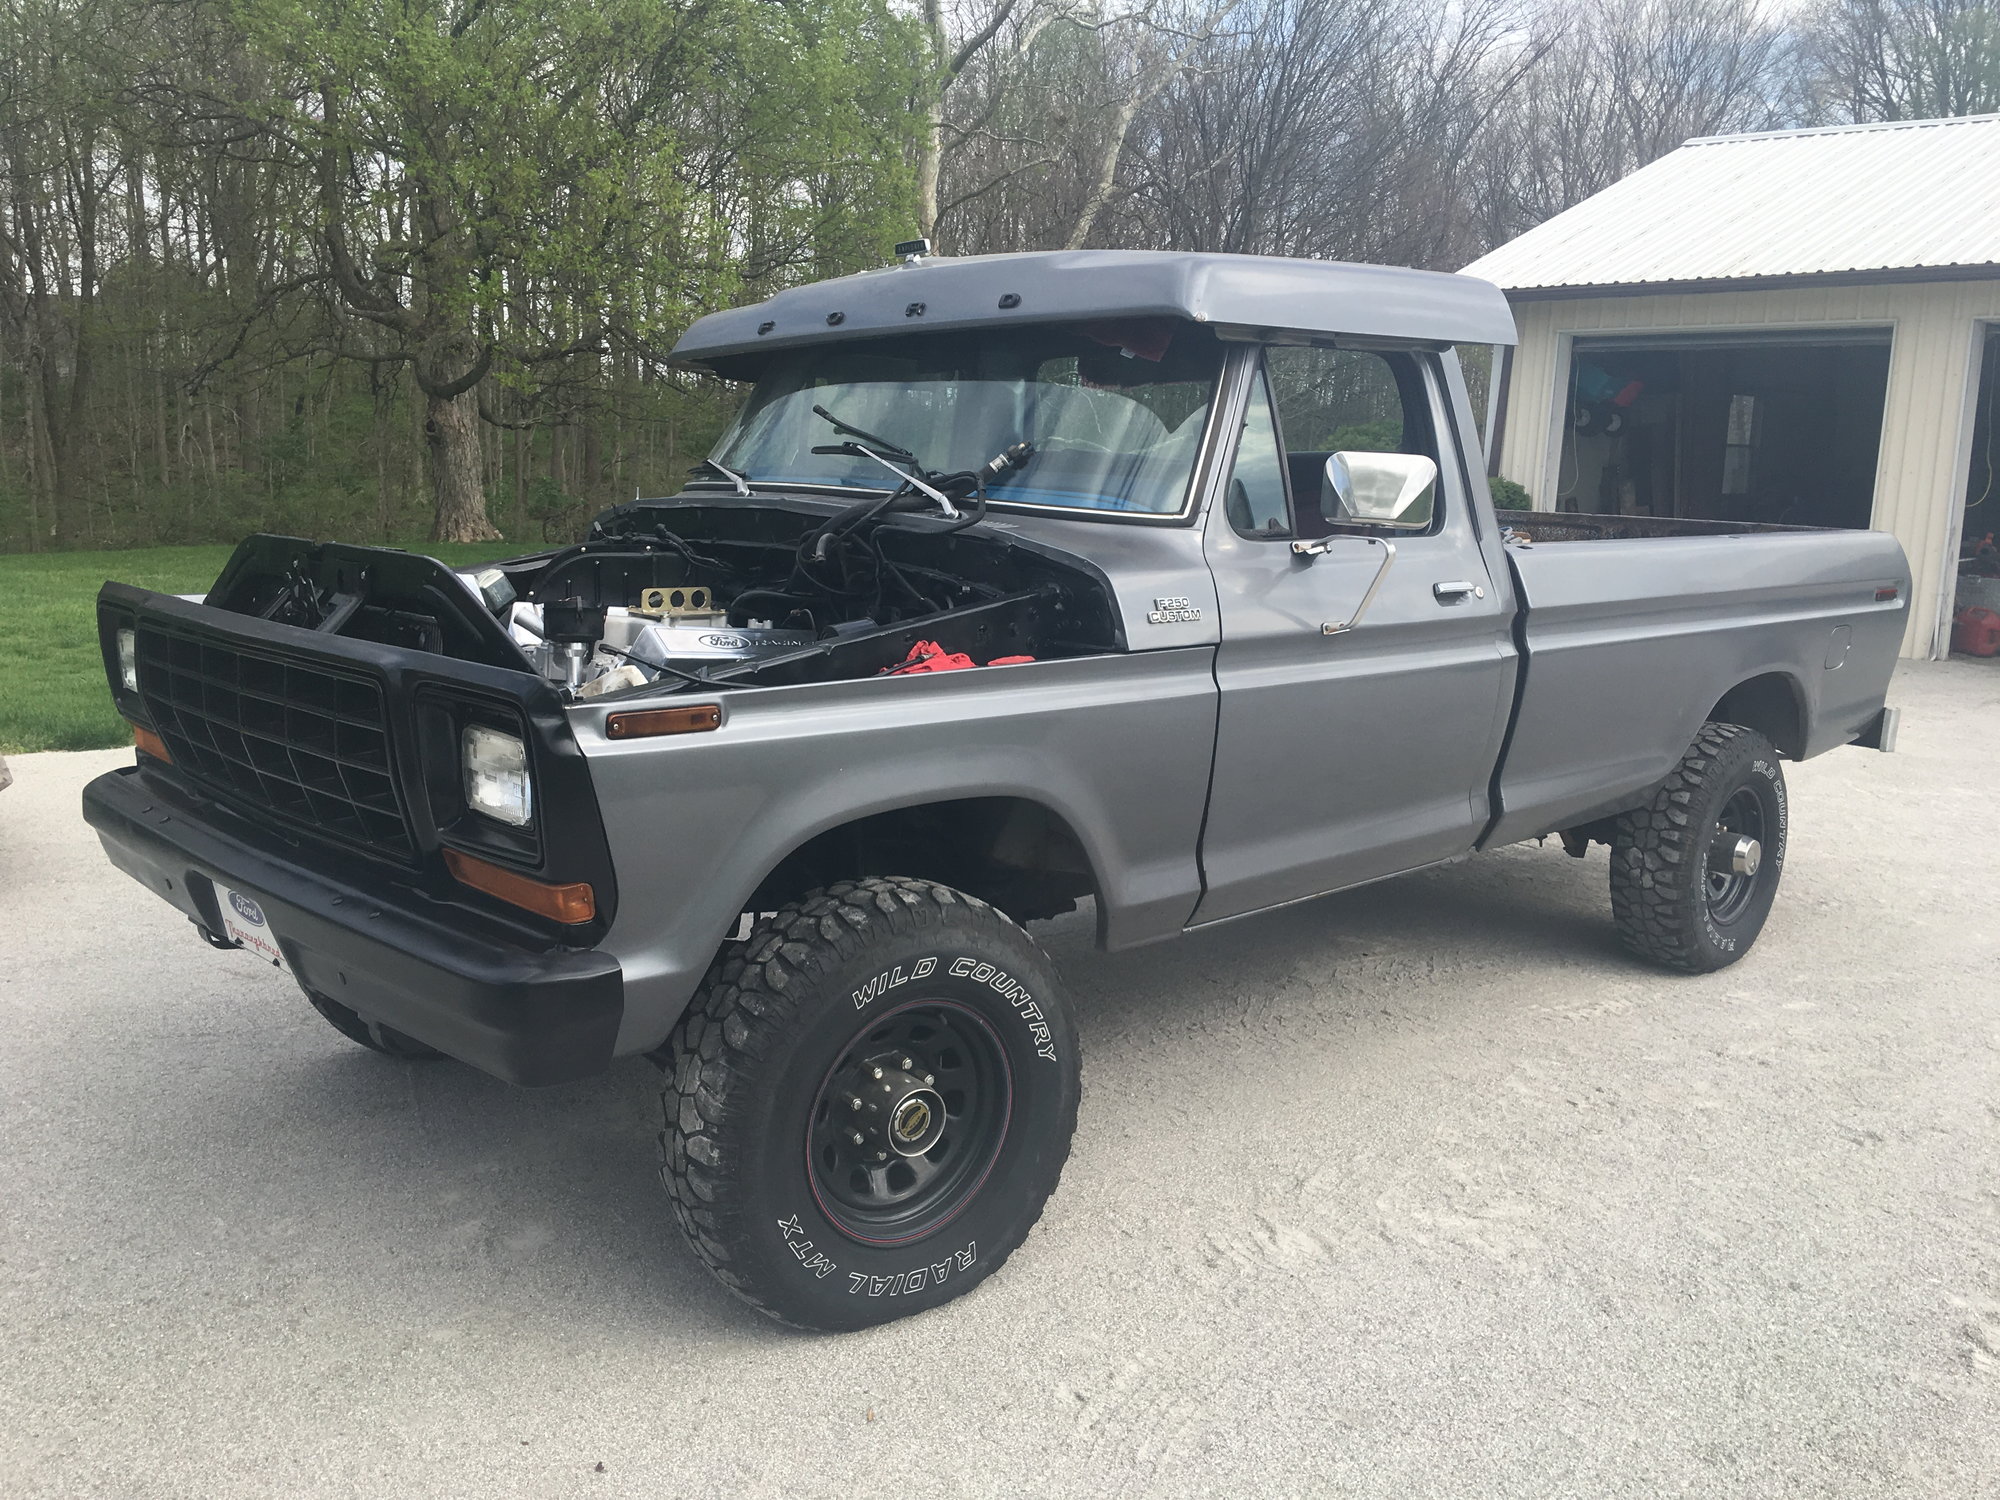 1979 Ford F250 351m to 460 Swap build - Ford Truck Enthusiasts Forums